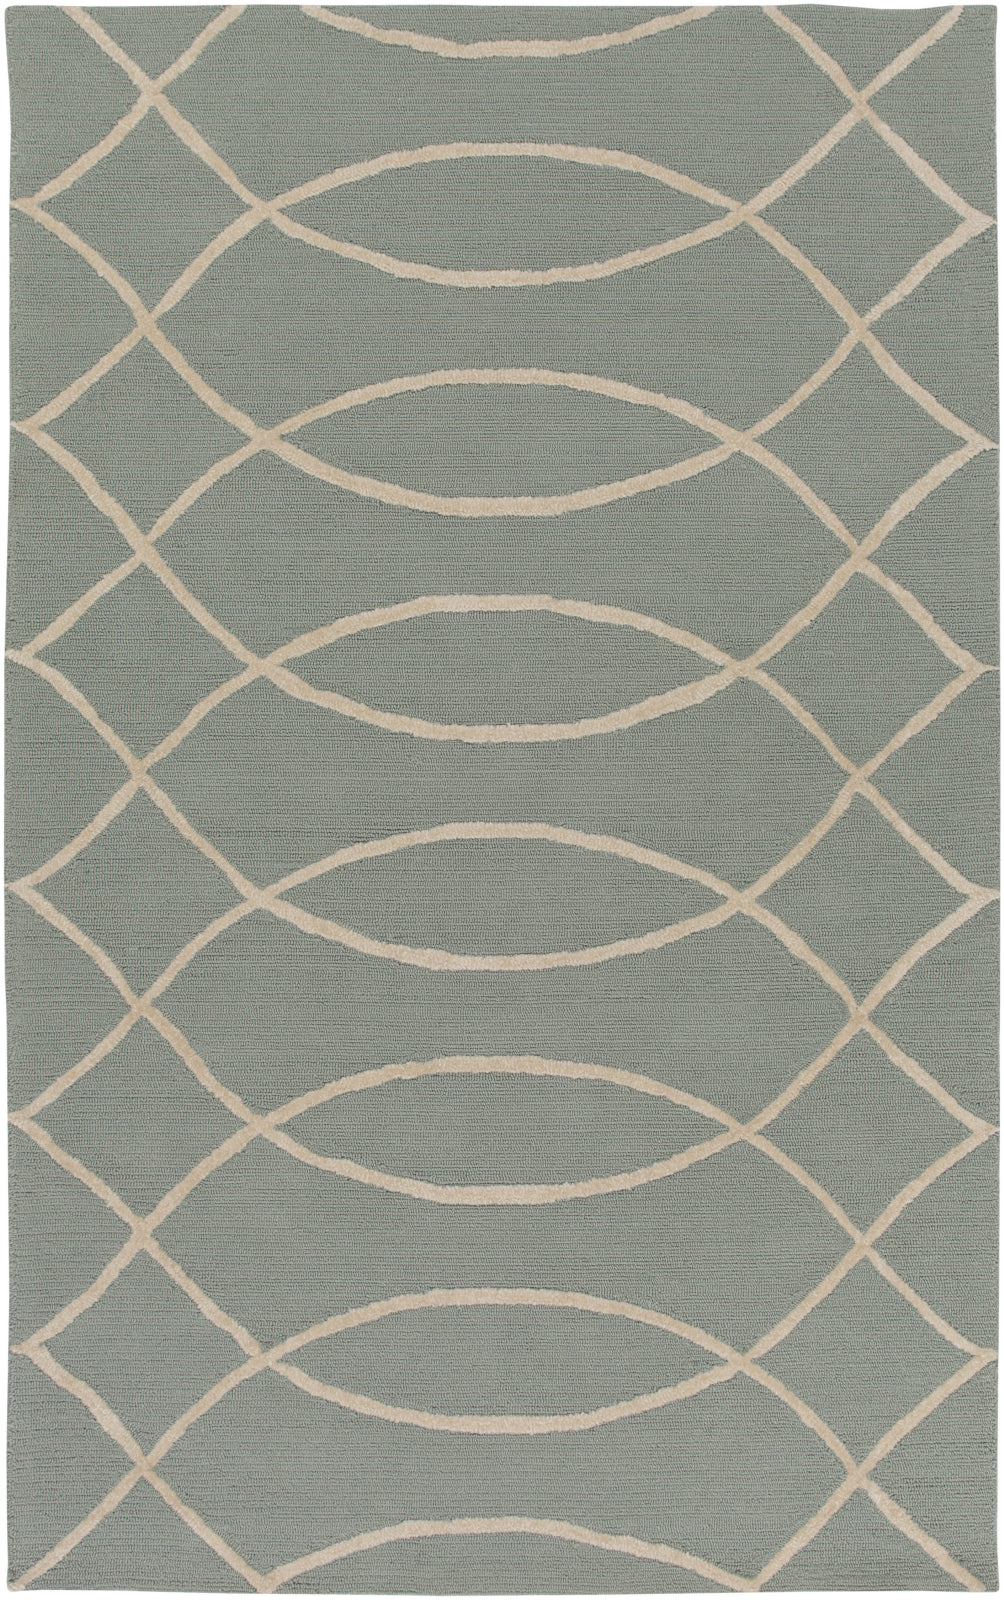 Surya Courtyard CTY-4013 Area Rug by Candice Olson